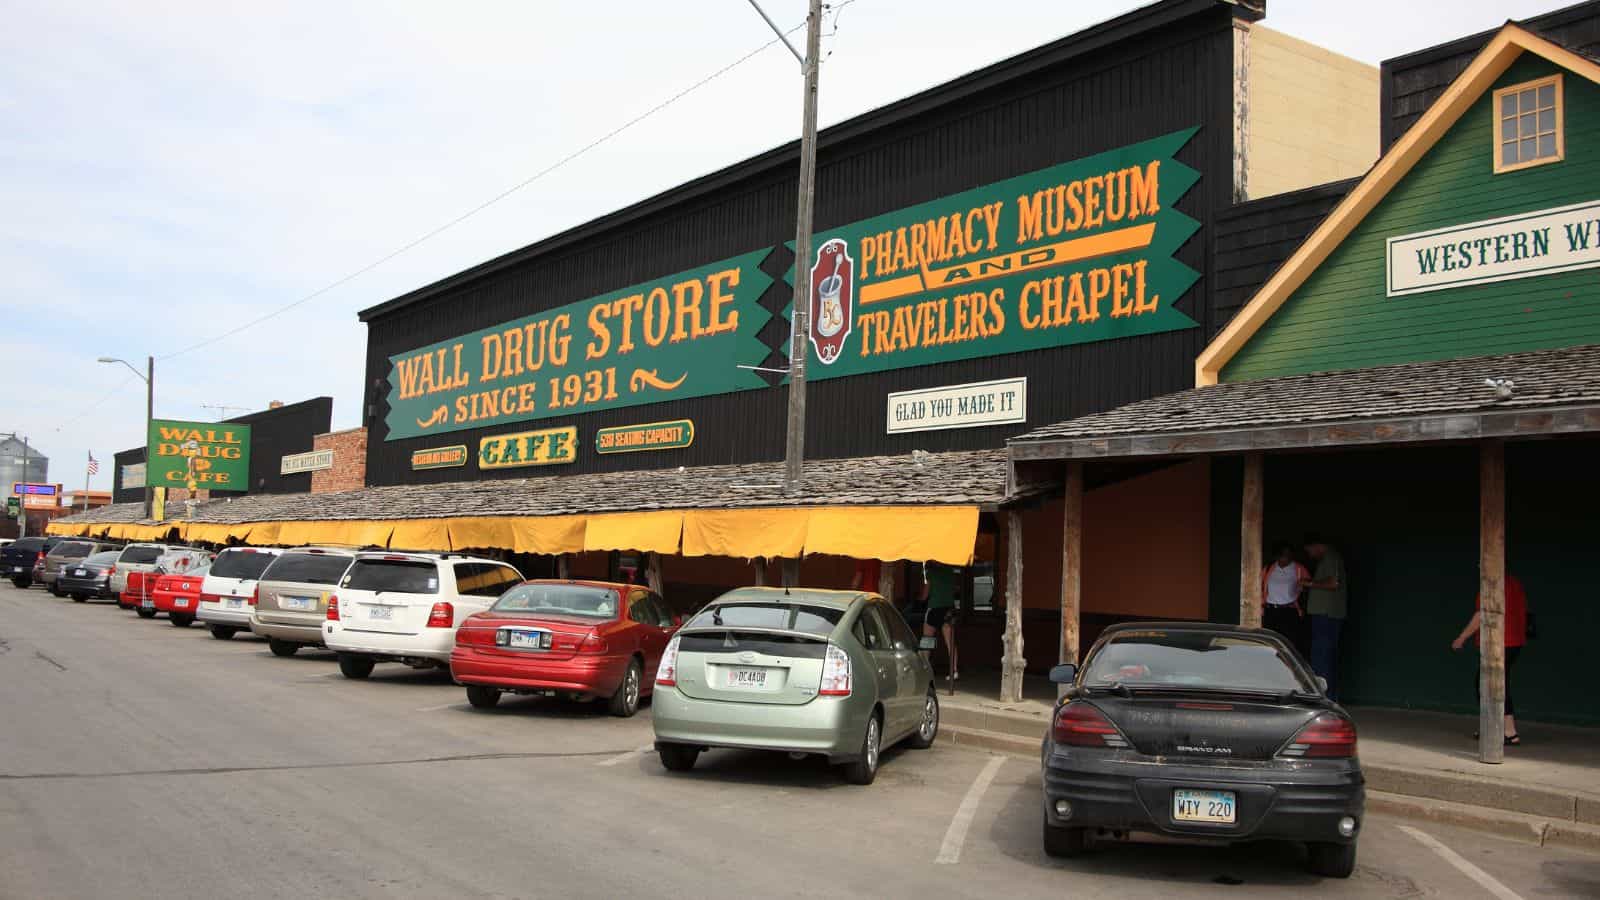 <p>Wall Drug is known as the mecca of highway billboards. Advertised for hundreds of miles, but once you arrive, it’s basically a glorified gift shop. Even the free ice water doesn’t make it a must-visit.</p>